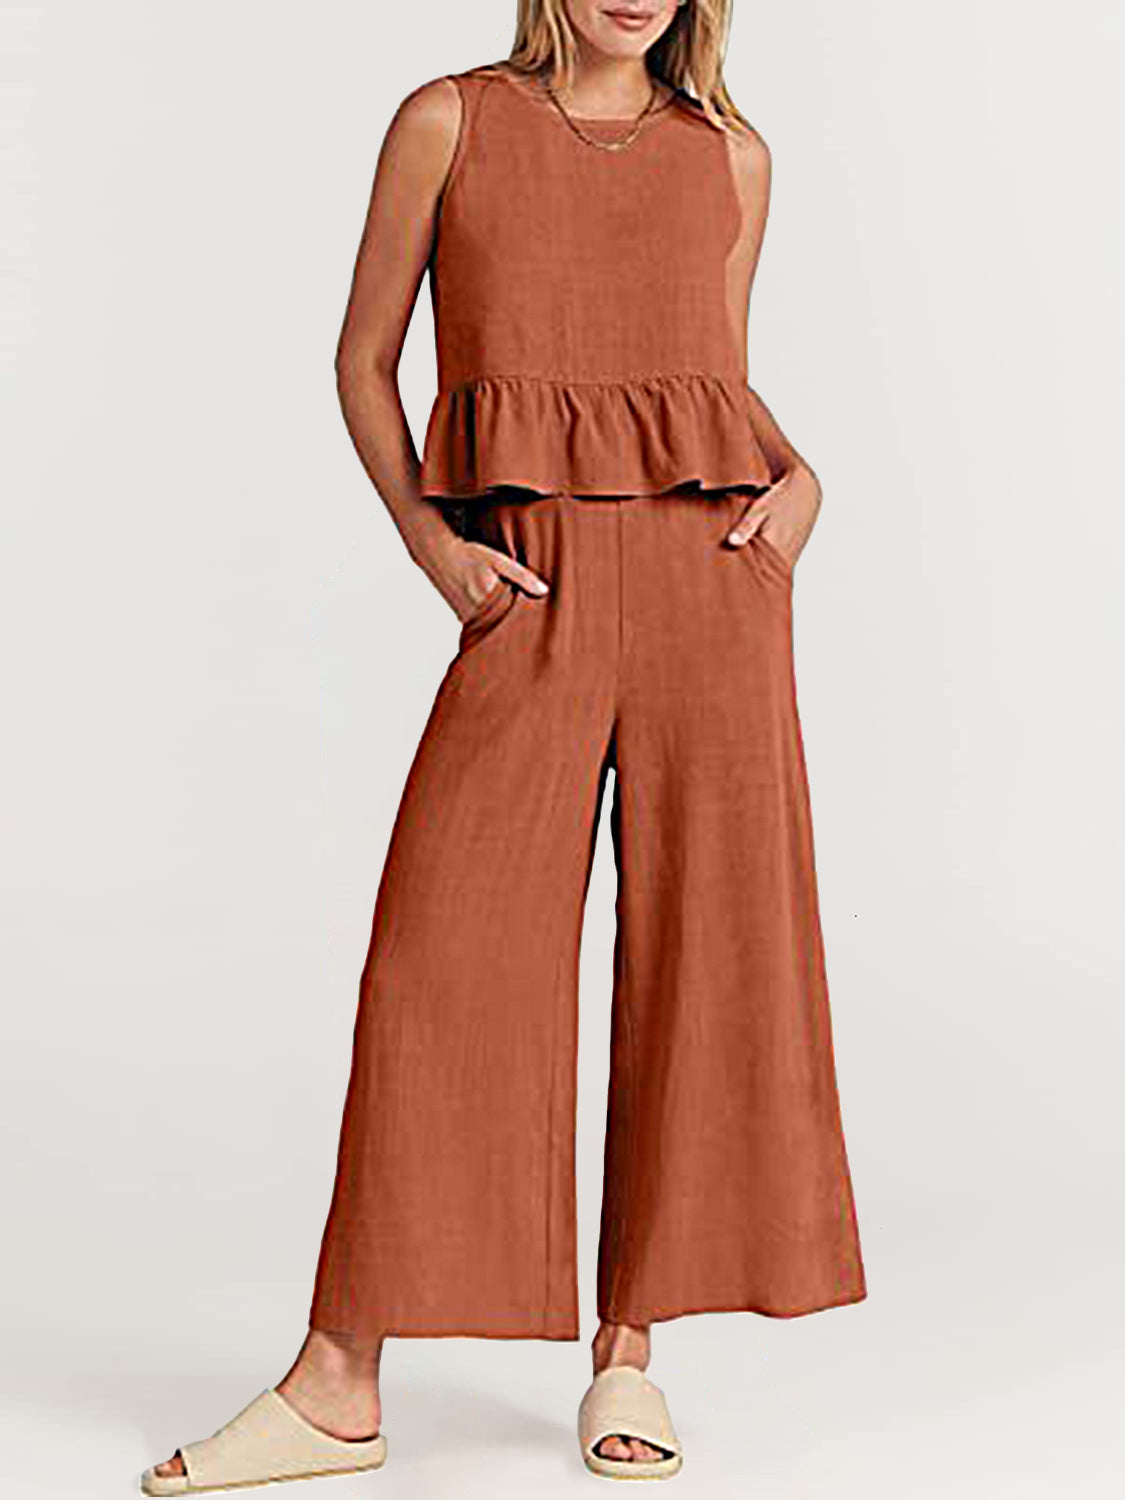 NTG Fad Two Pieces Sets Orange / S(4-6) Two Piece Outfits Sleeveless Top and Wide Leg Pants Lounge Set